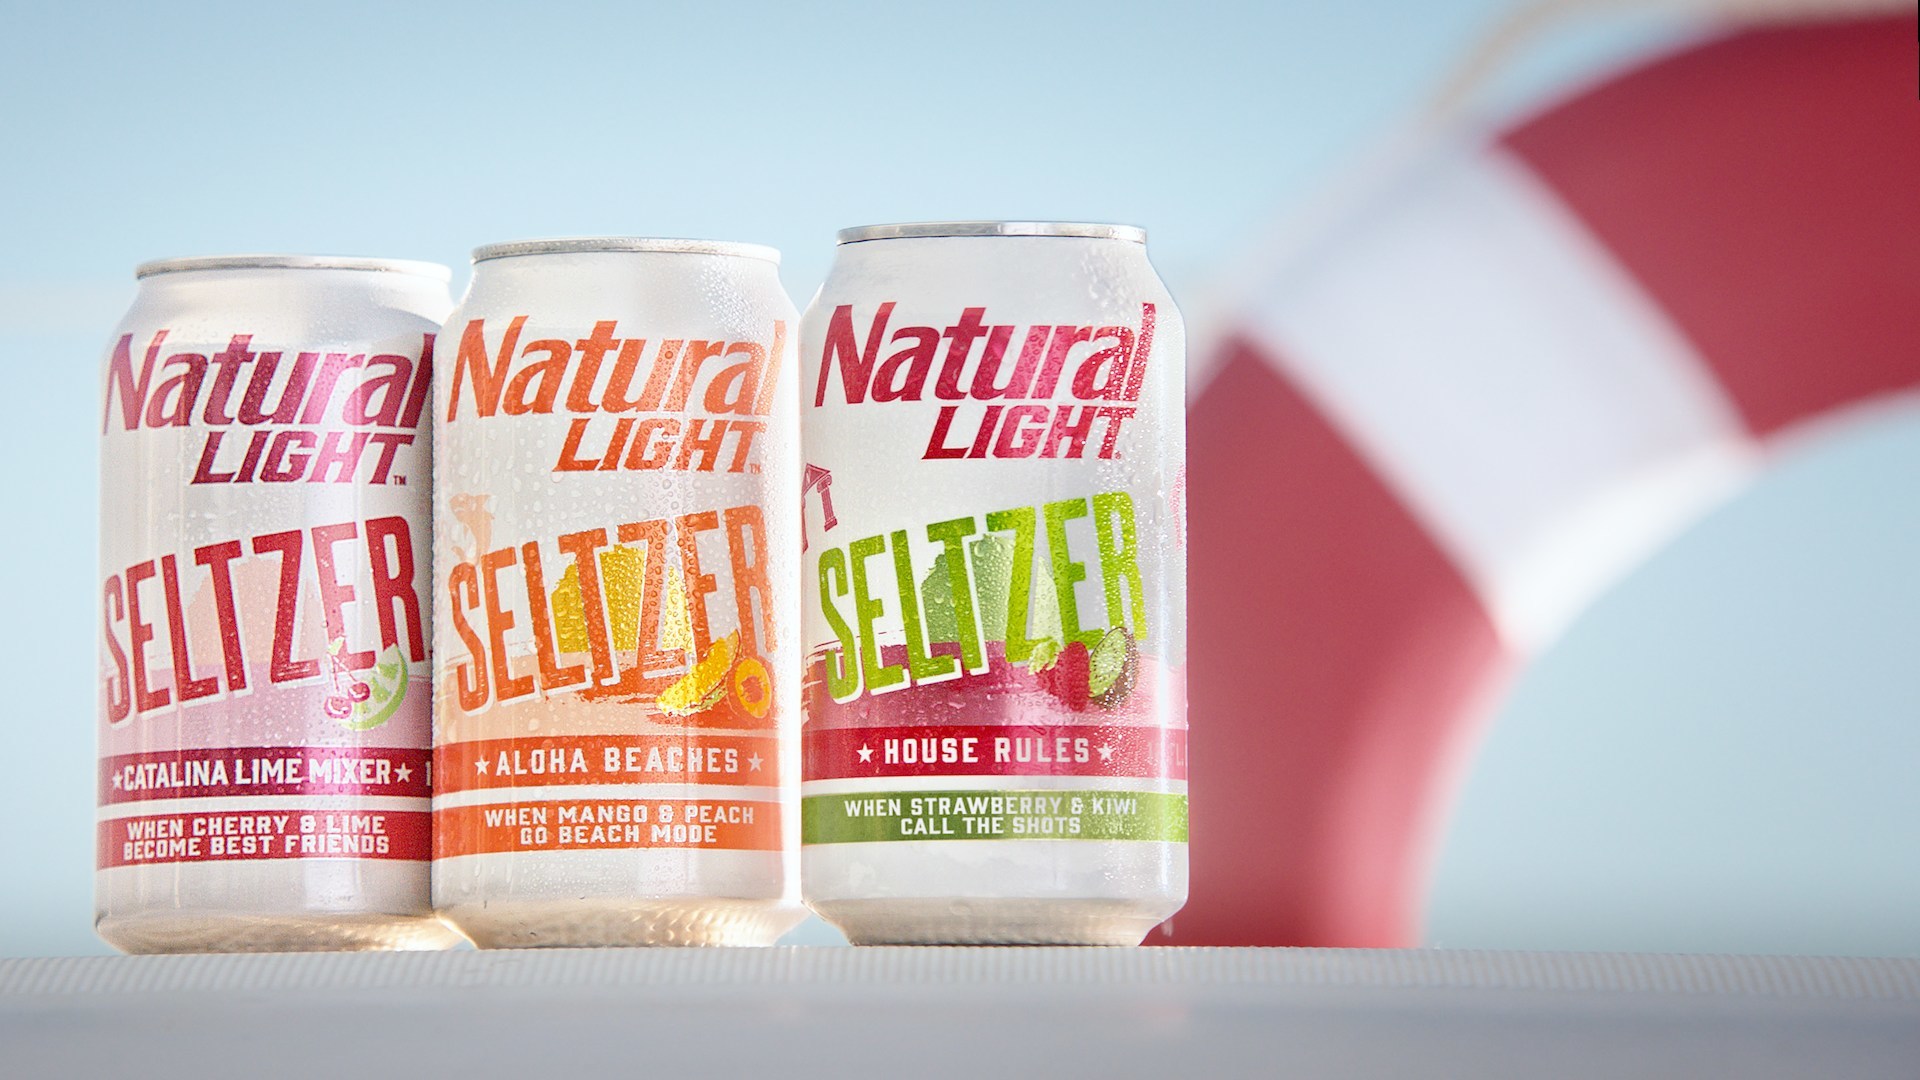 Natural Light Seltzer Is Inviting You To Their House Party For The Big Game